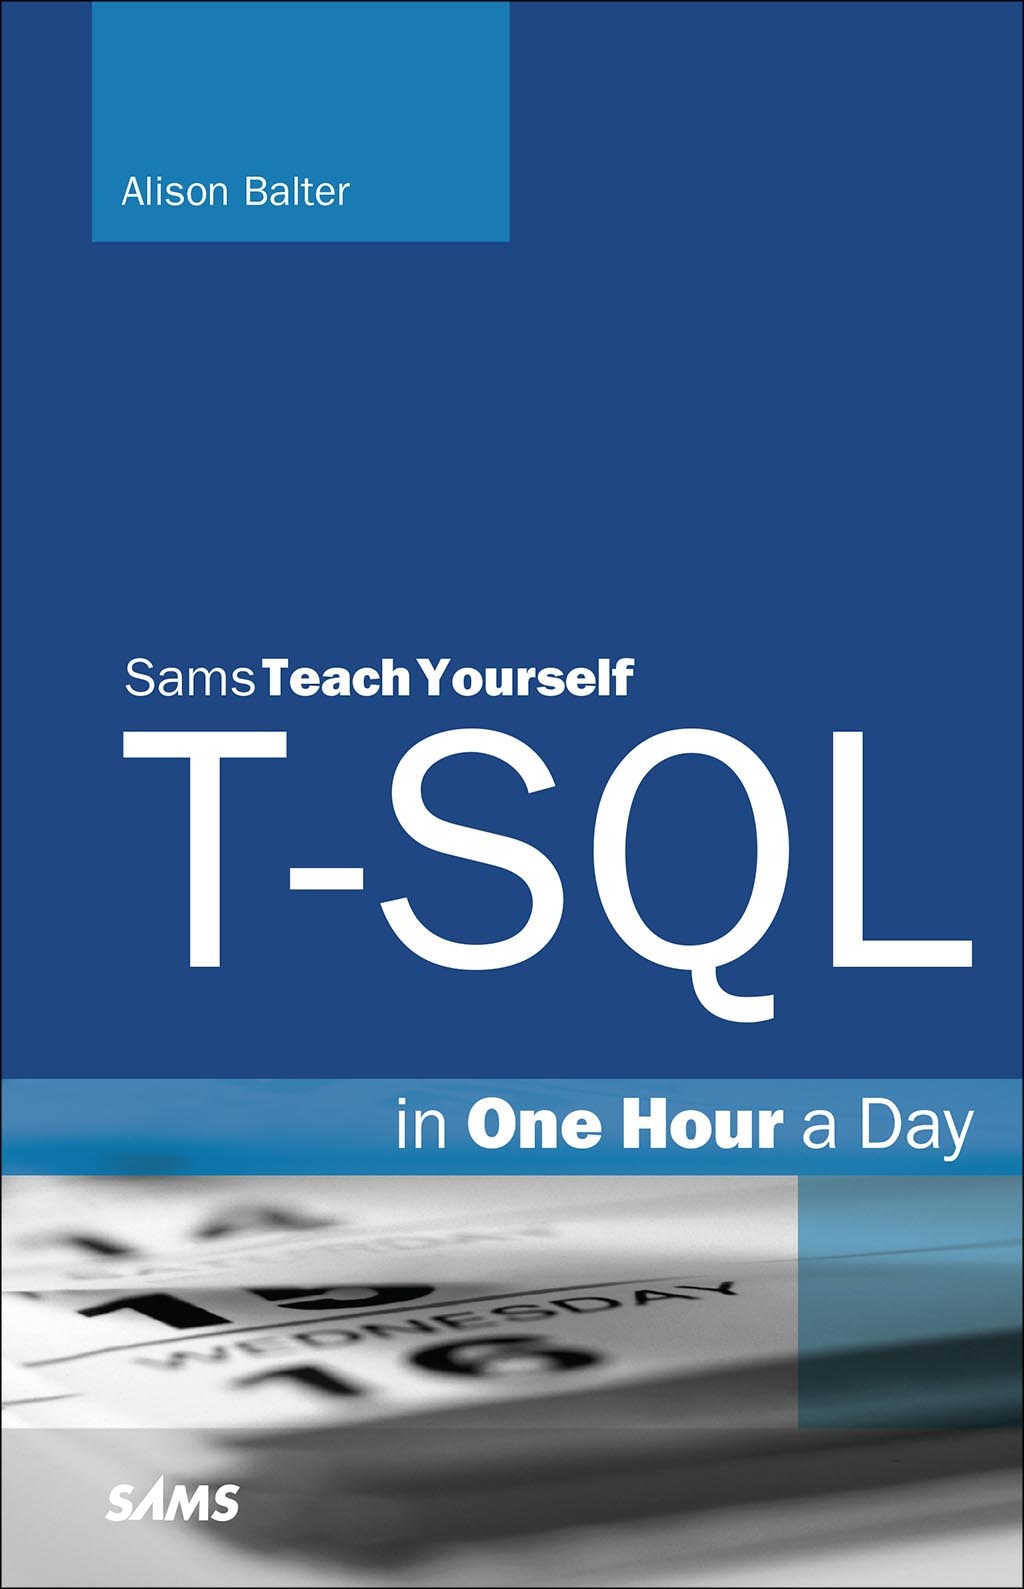 T-SQL in One Hour a Day, Sams Teach Yourself